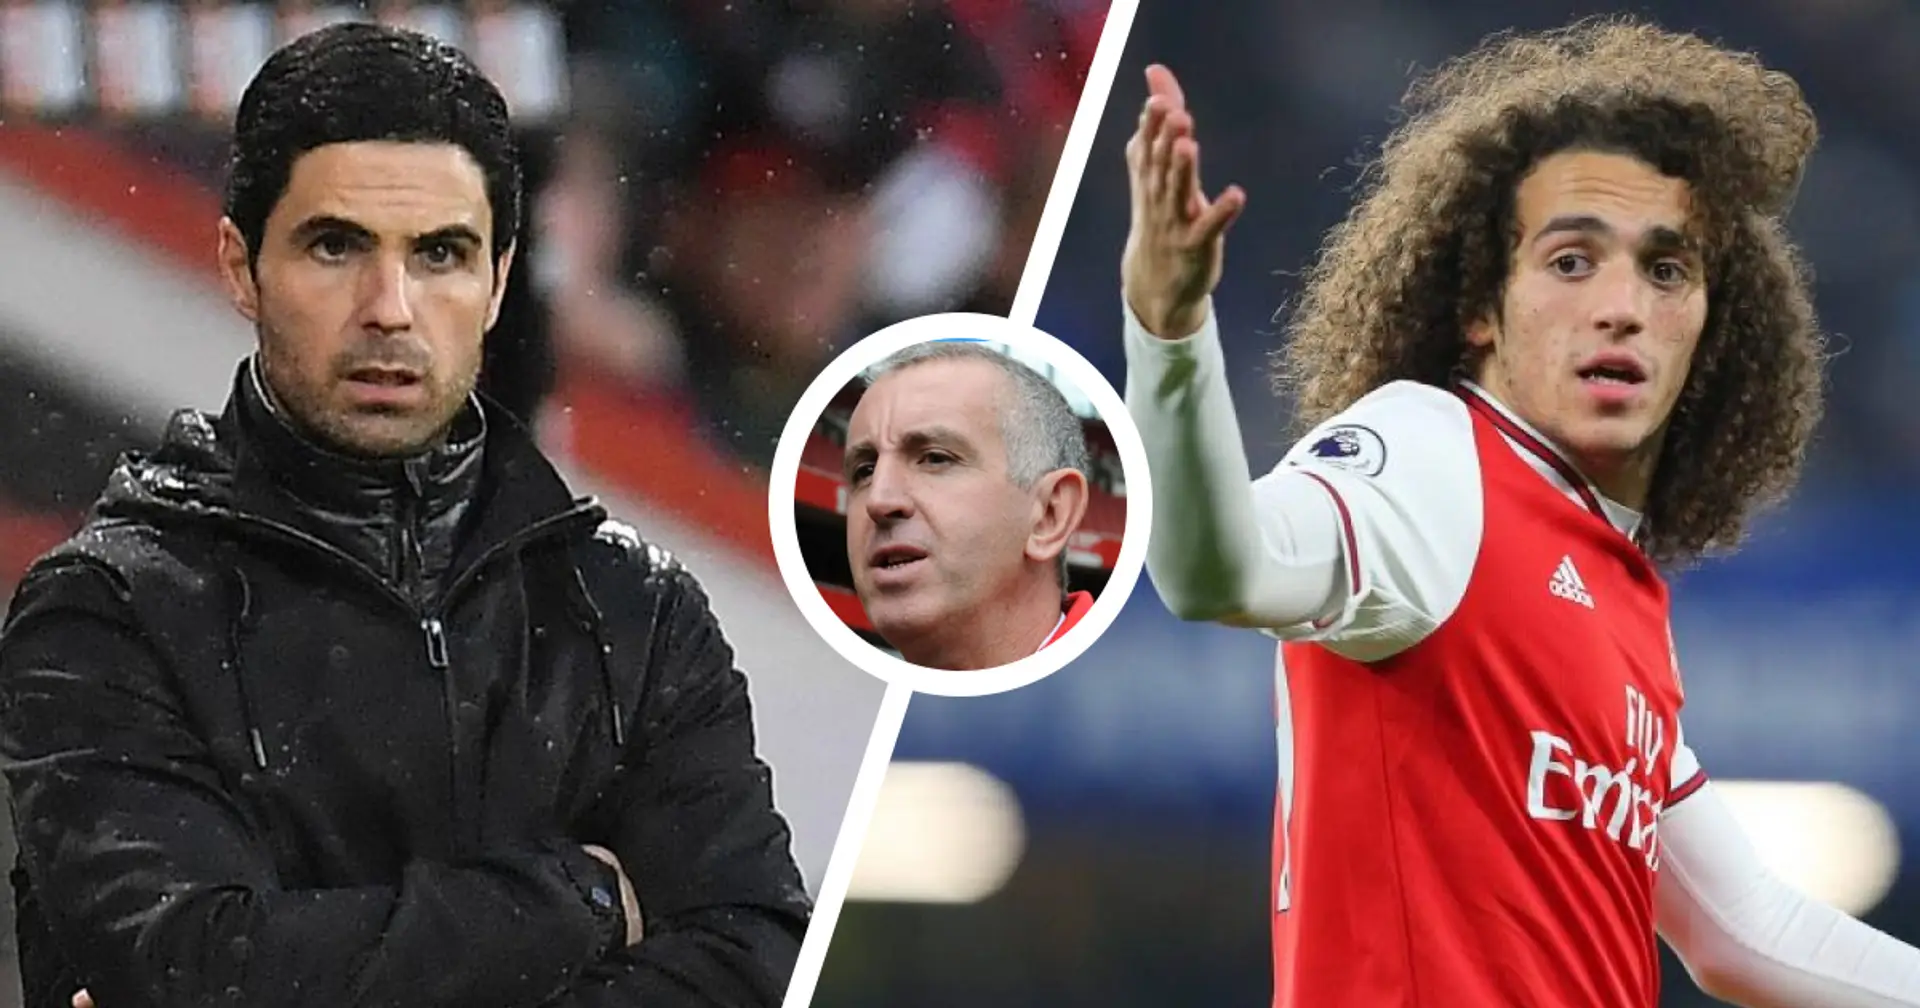 'He won’t take any messing around and that’s a good thing': Nigel Winterburn explains why Arteta is right playing hardball with Guendouzi